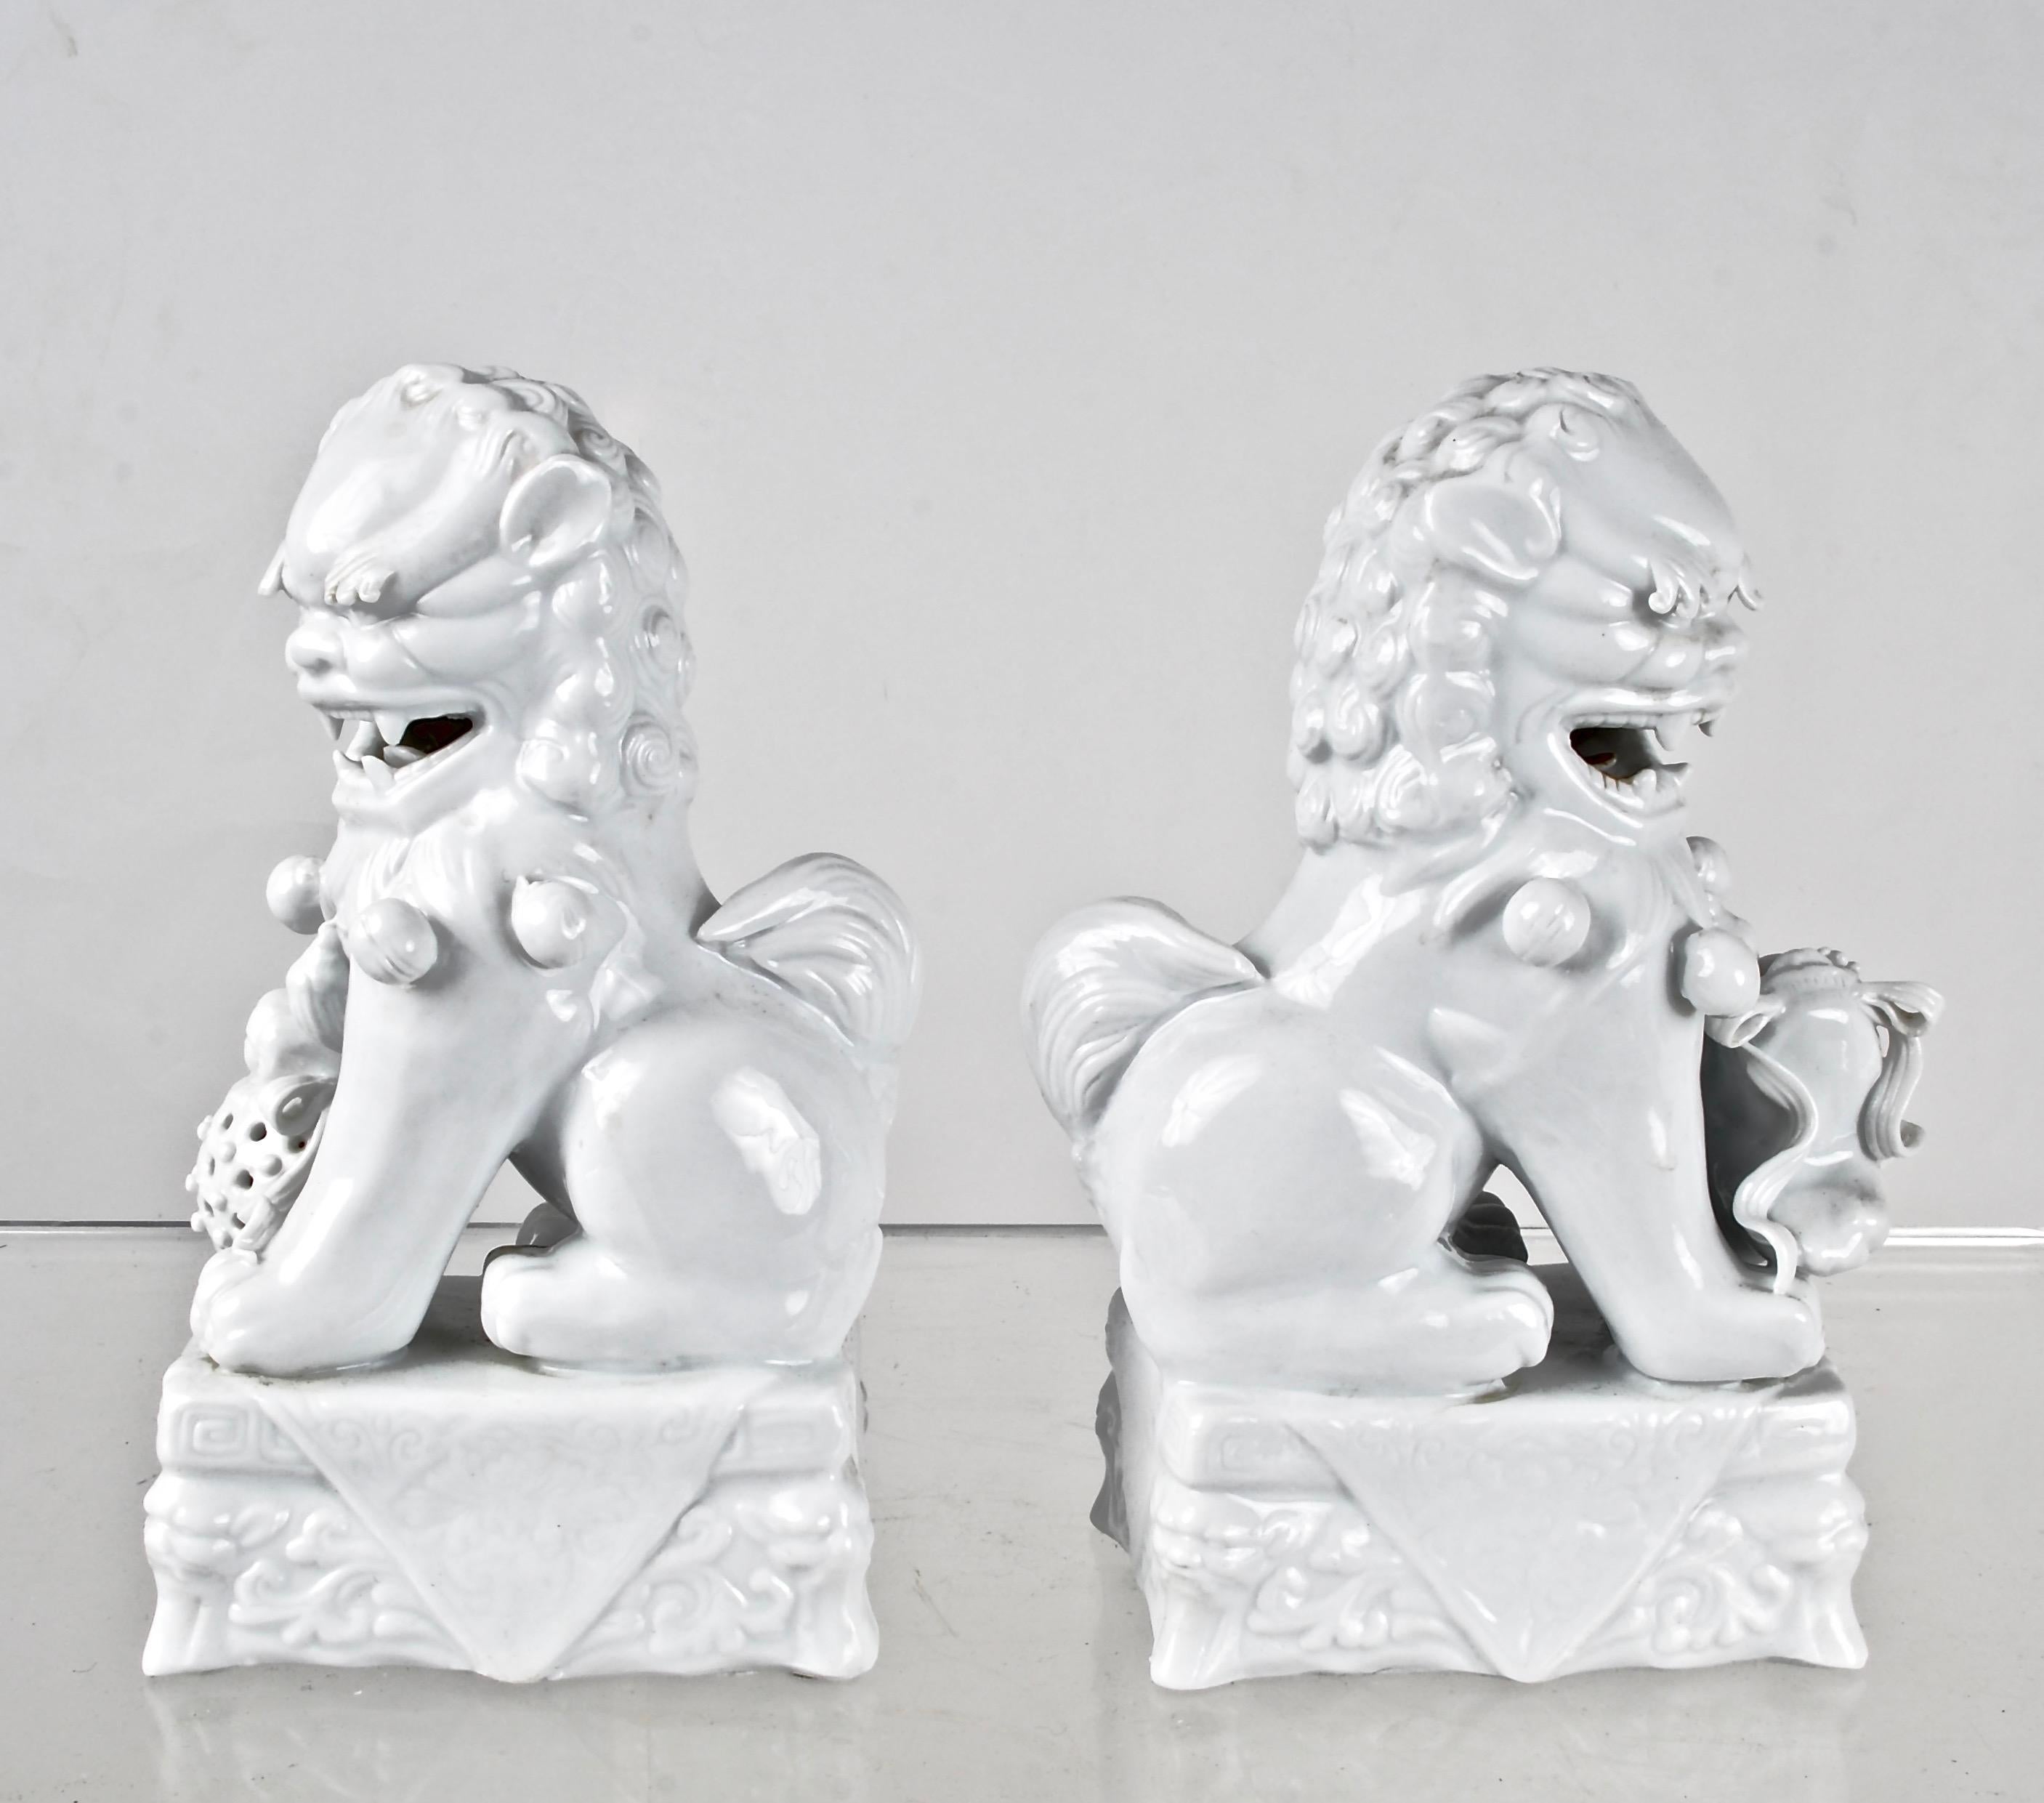 A wonderfully detailed pair with fine modeling and beautiful glaze over true white. A true pair, with one figure holding a cat fish complete with whiskers and the other a cricket cage. Great attention to detail and traditional whimsical expressions.